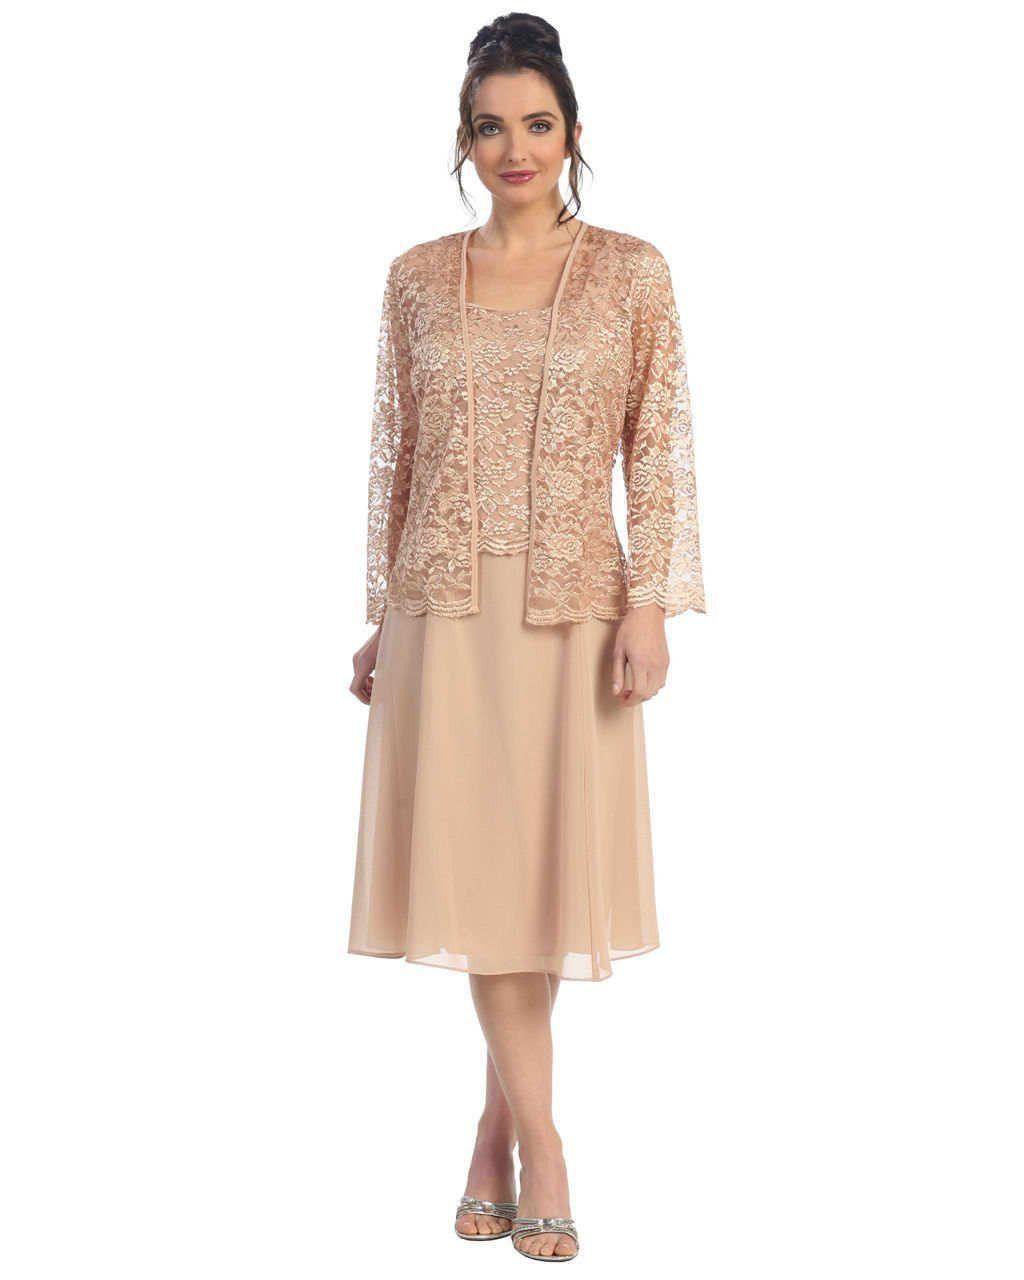 Short Mother Of The Bride Dress With Jacket - The Dress Outlet Sally